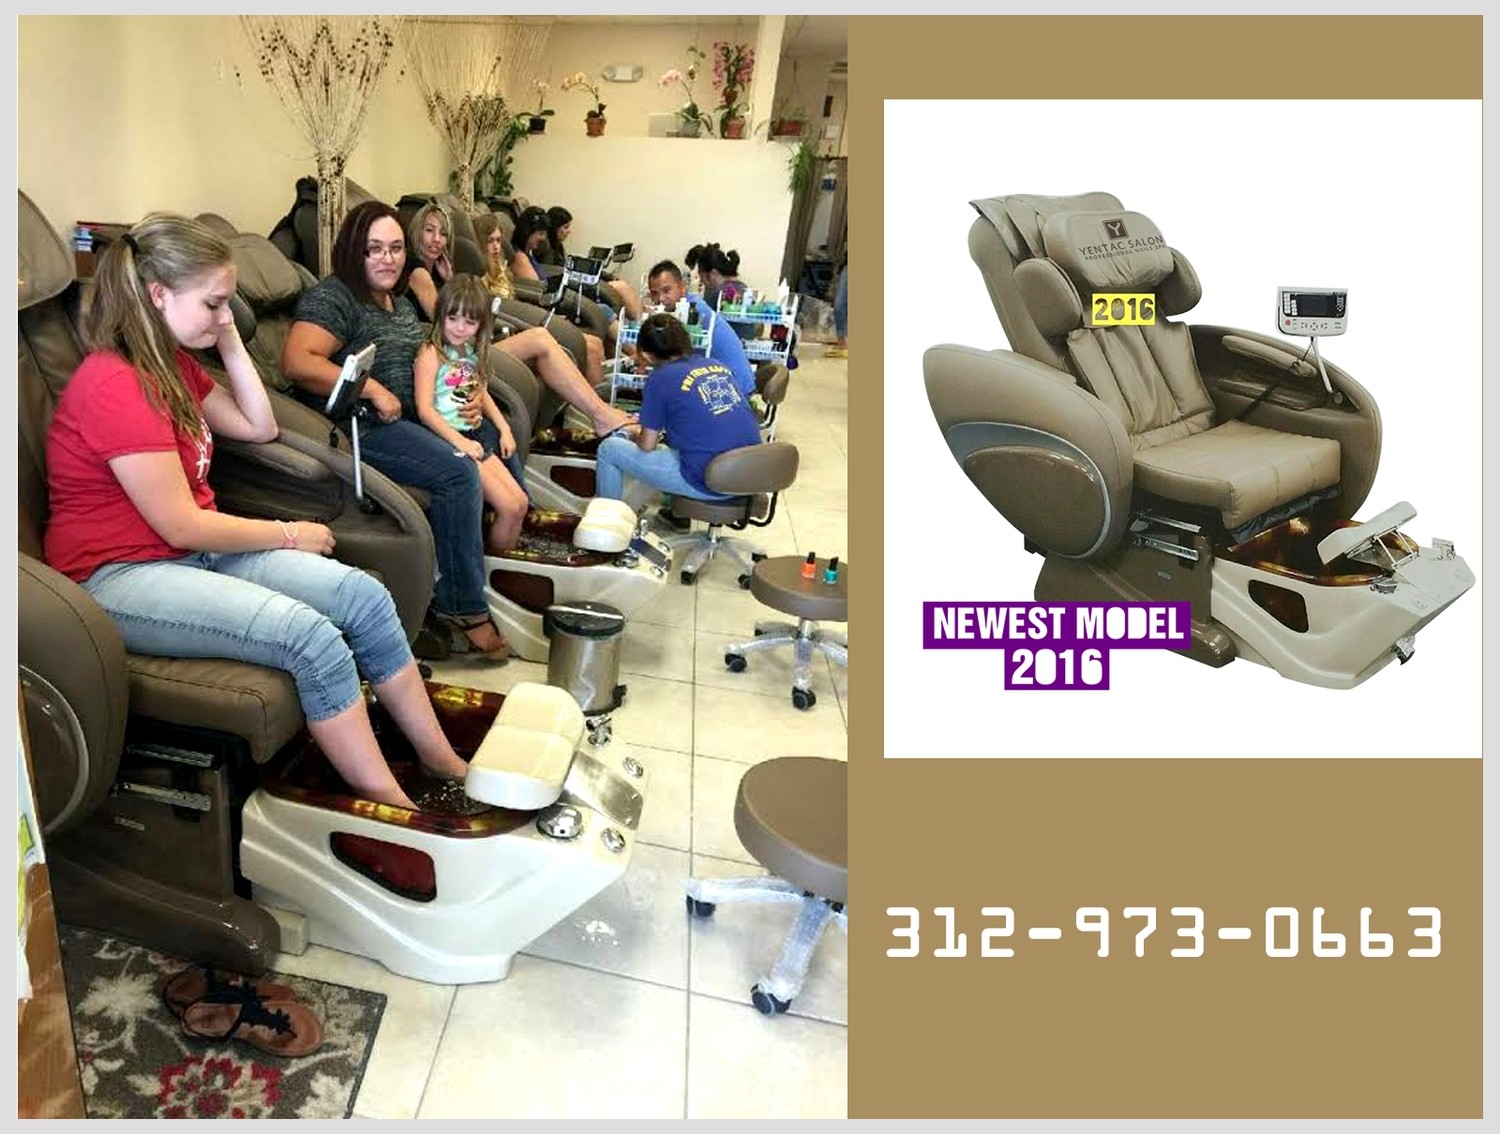 New 2016 Spa Pedicure Chair Massage F-8000 For Nail Salon Owner